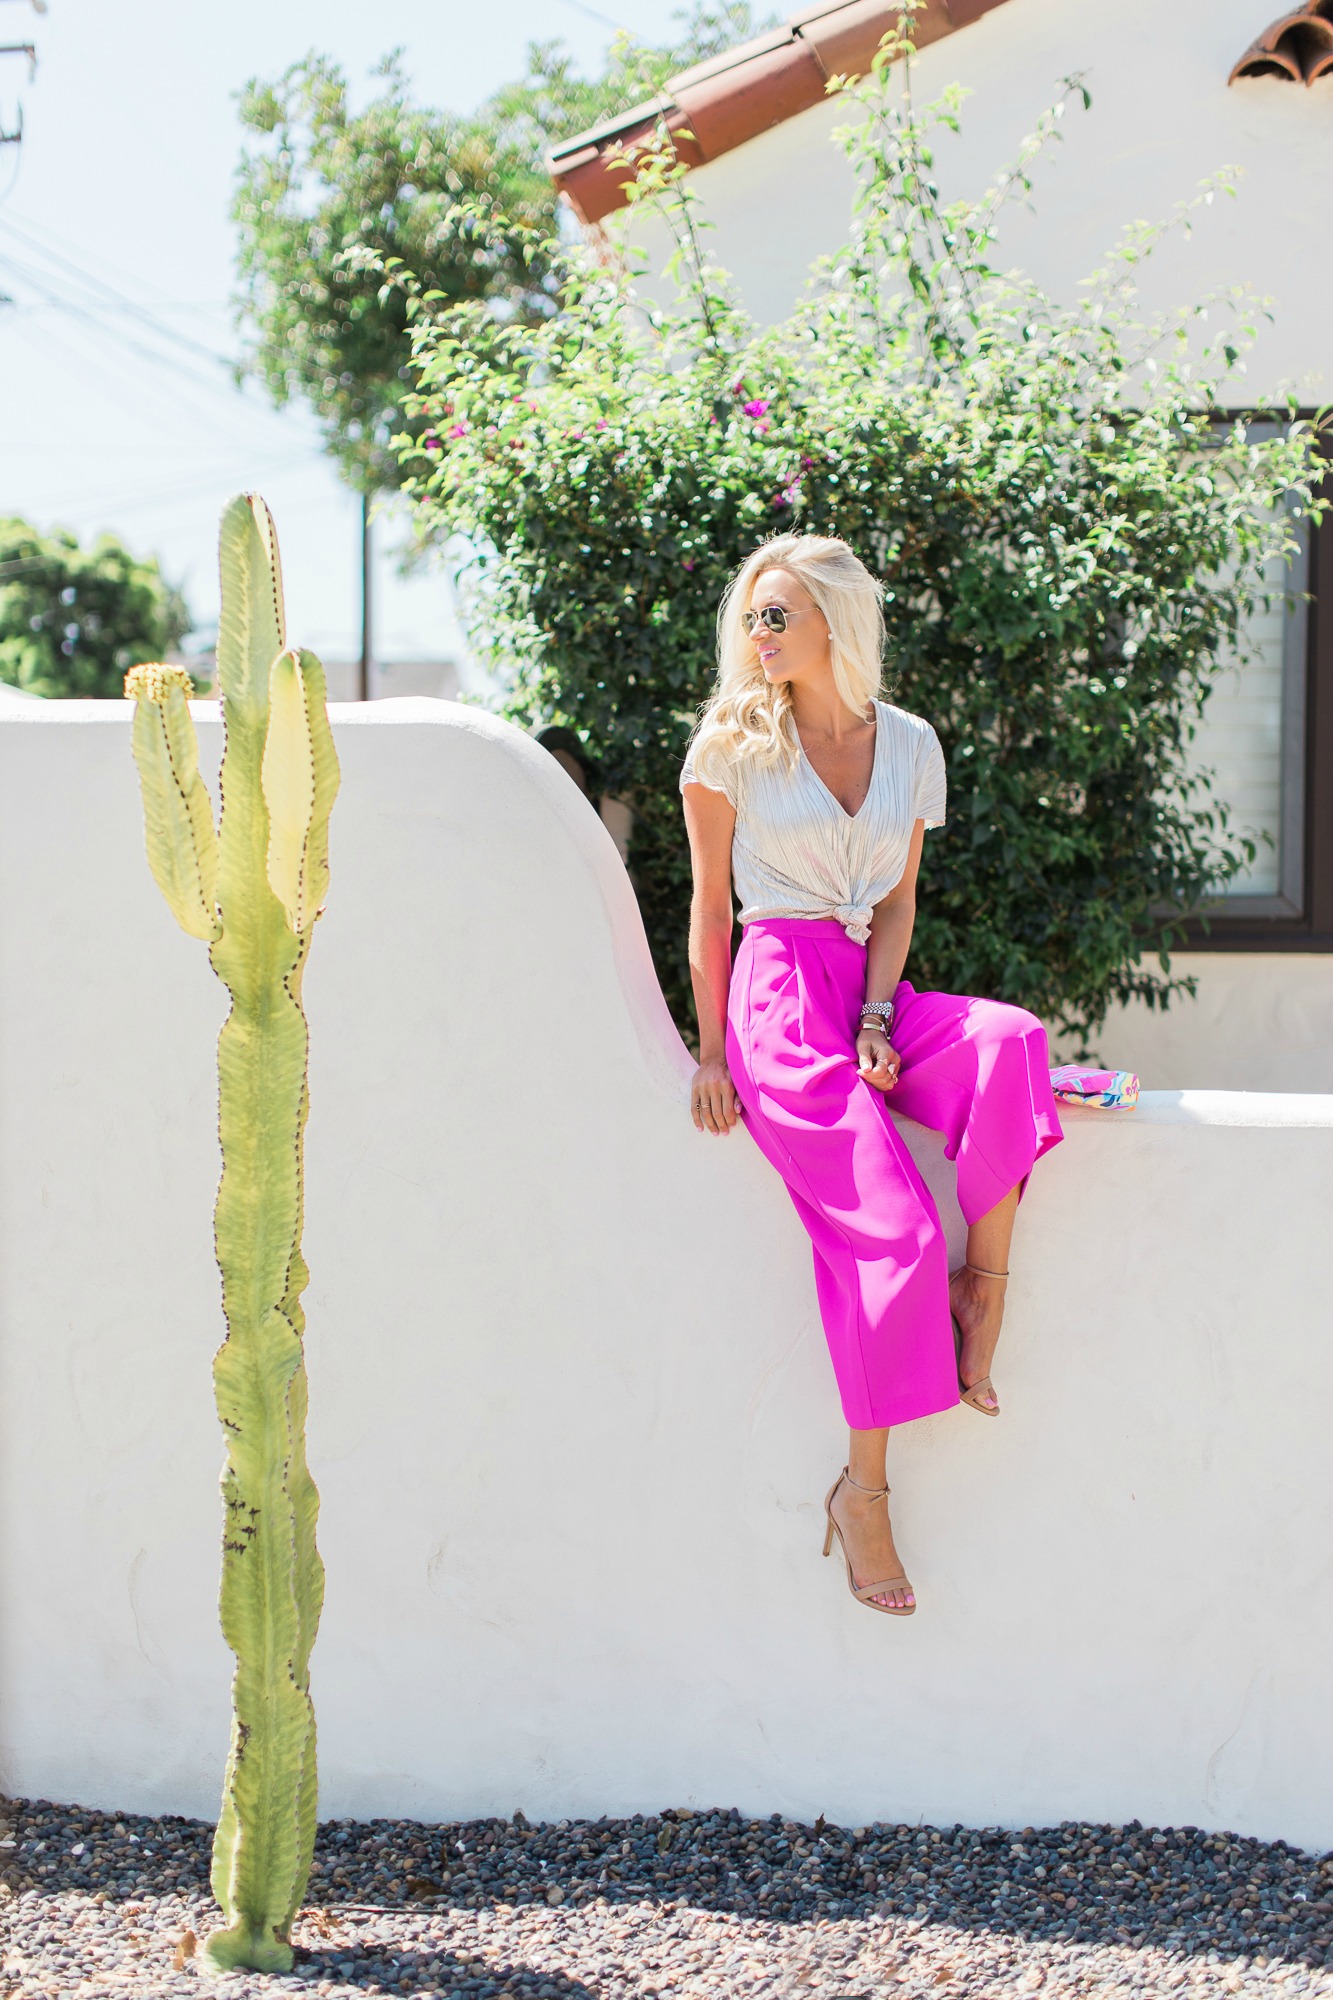 Hot Pink Trousers / Culottes - How to style hot pink pants in